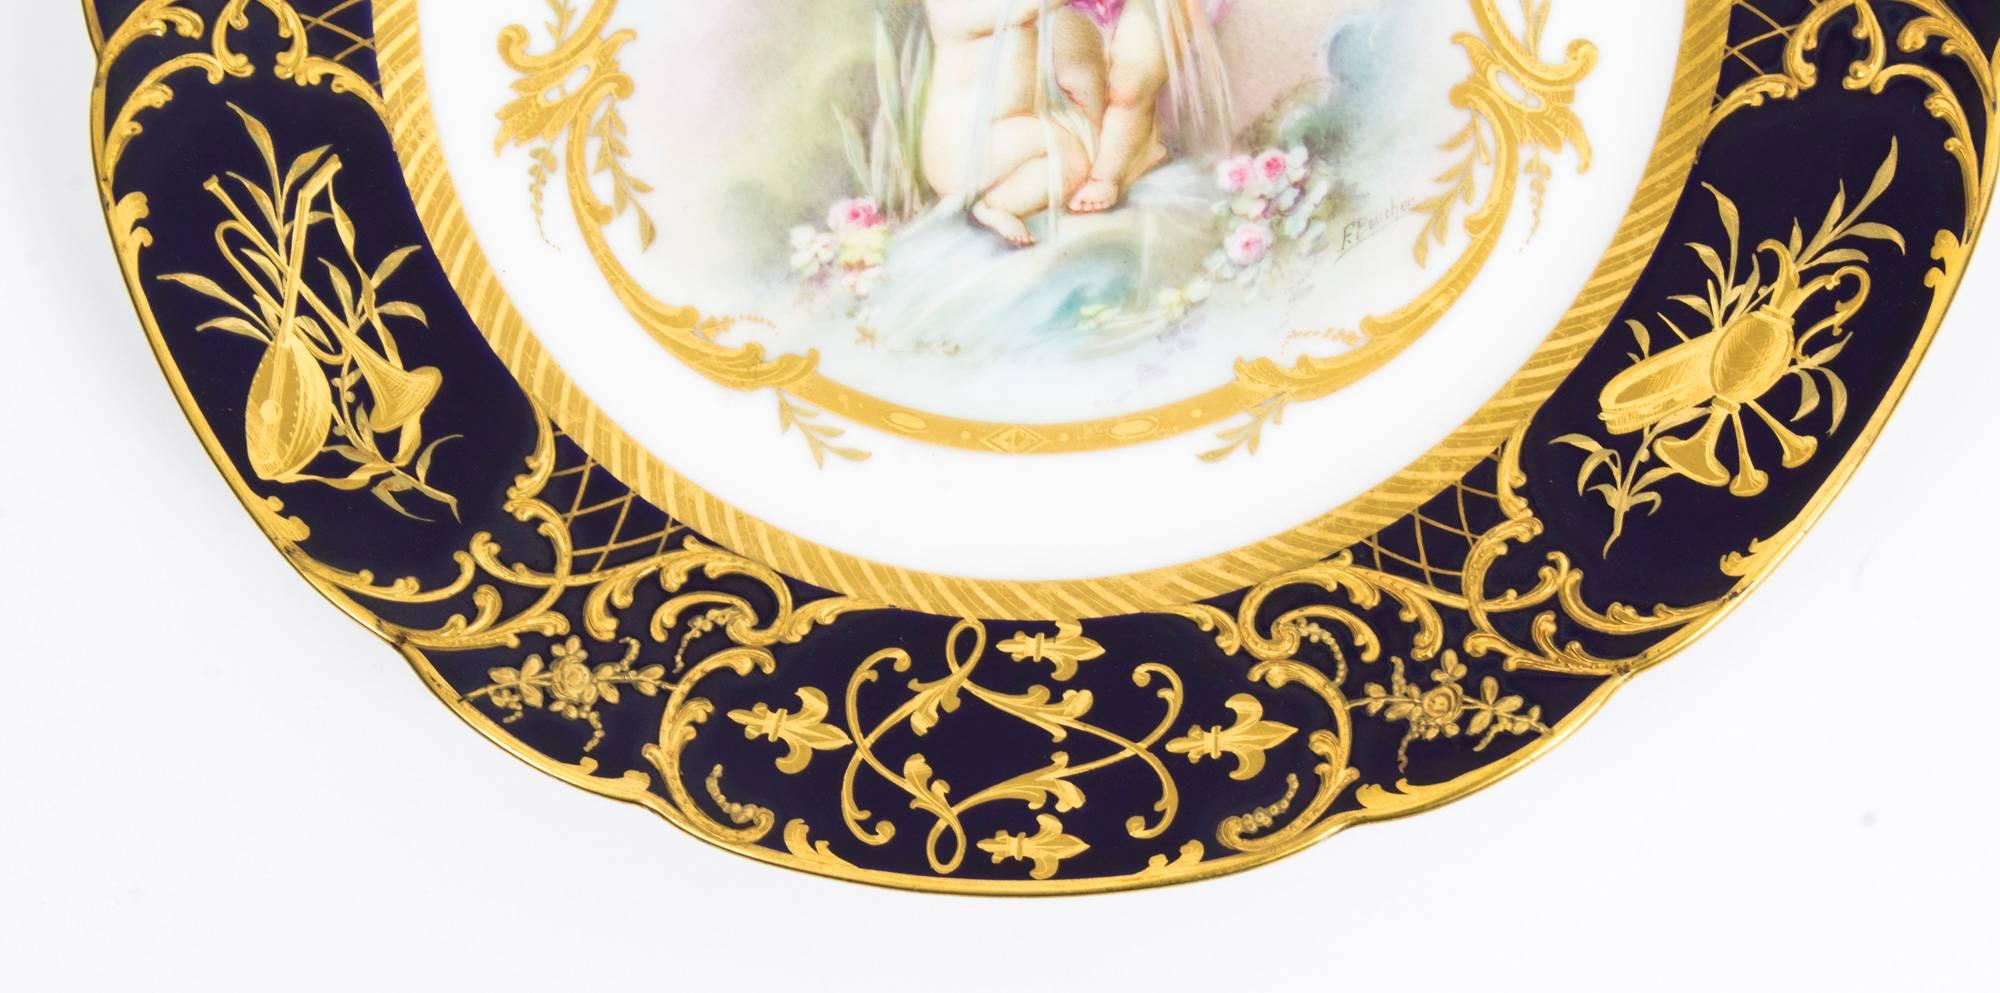 20th Century Antique Pair of French Cabinet Plates and Amorini x Boucher, circa 1900